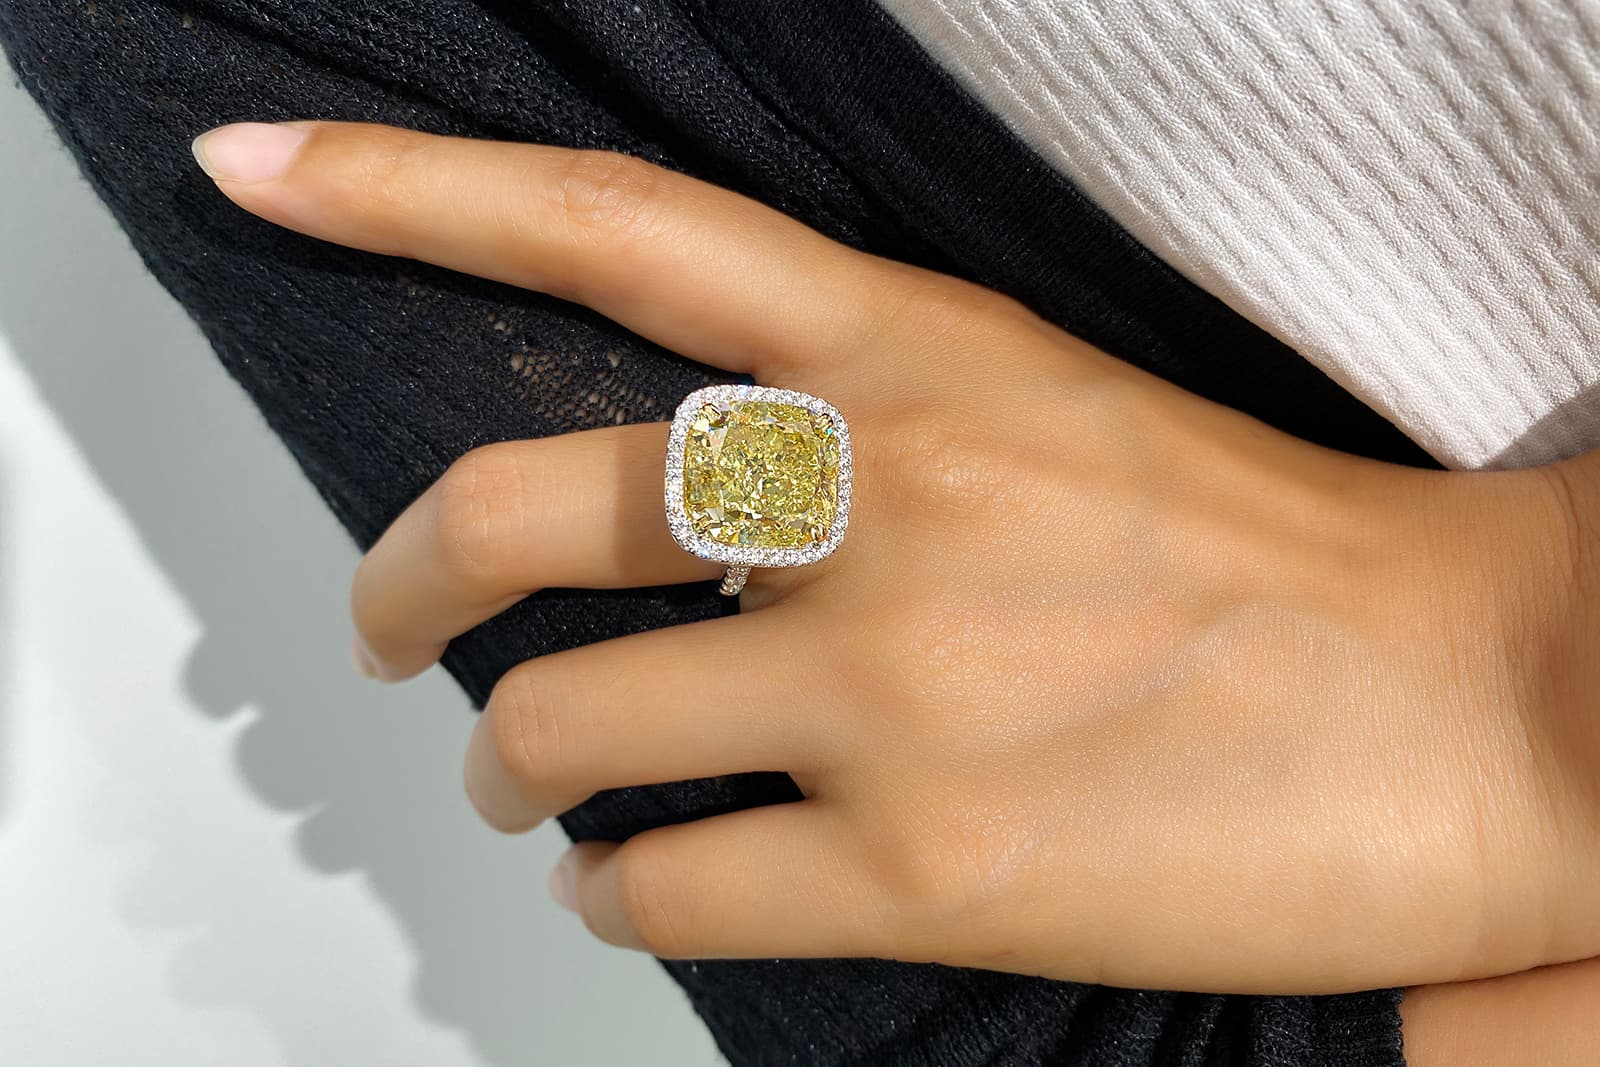 A 17 carat yellow diamond ring by Astteria 